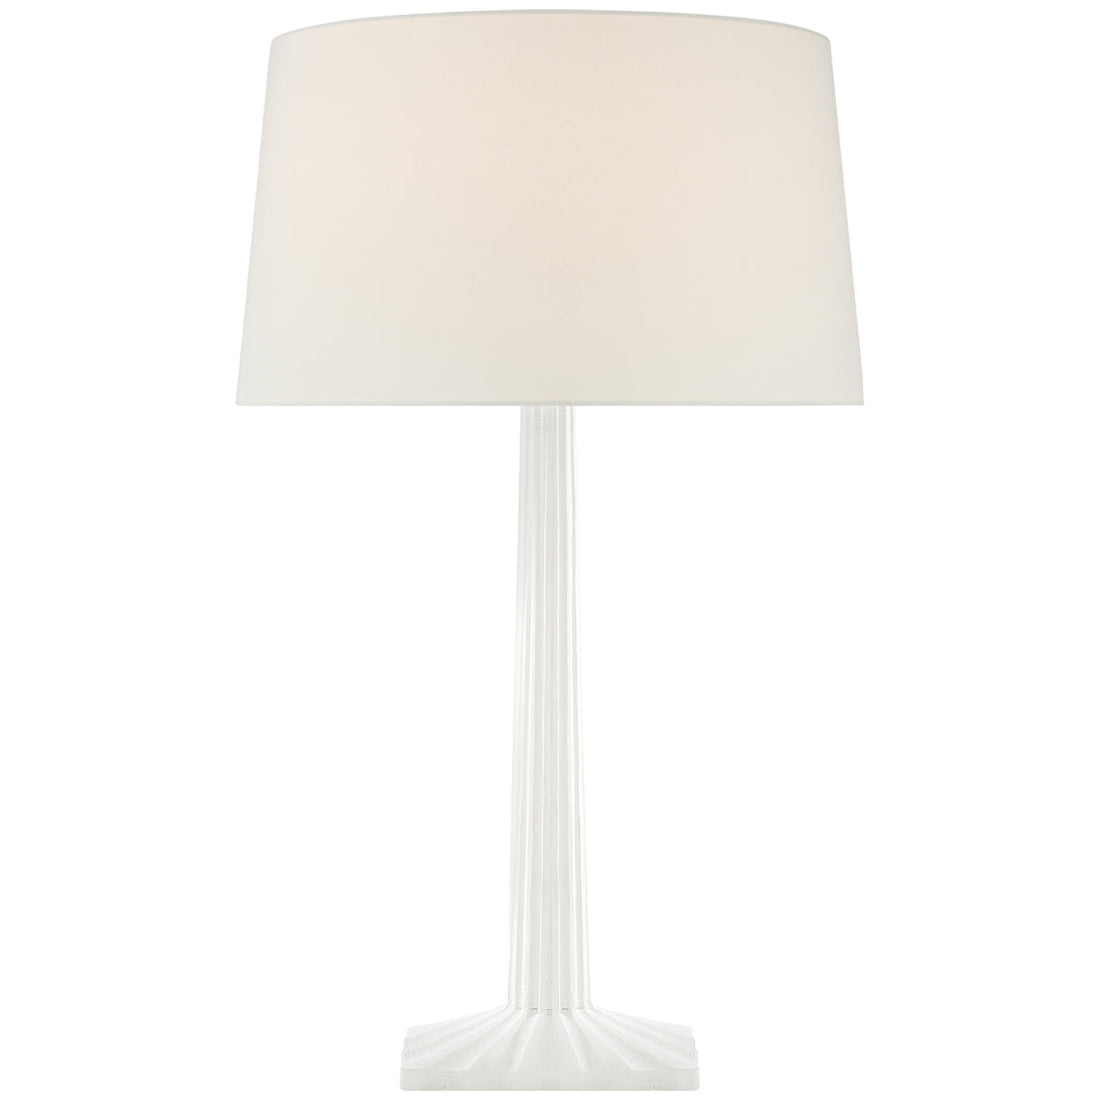 Visual Comfort Strie Fluted Column Table Lamp